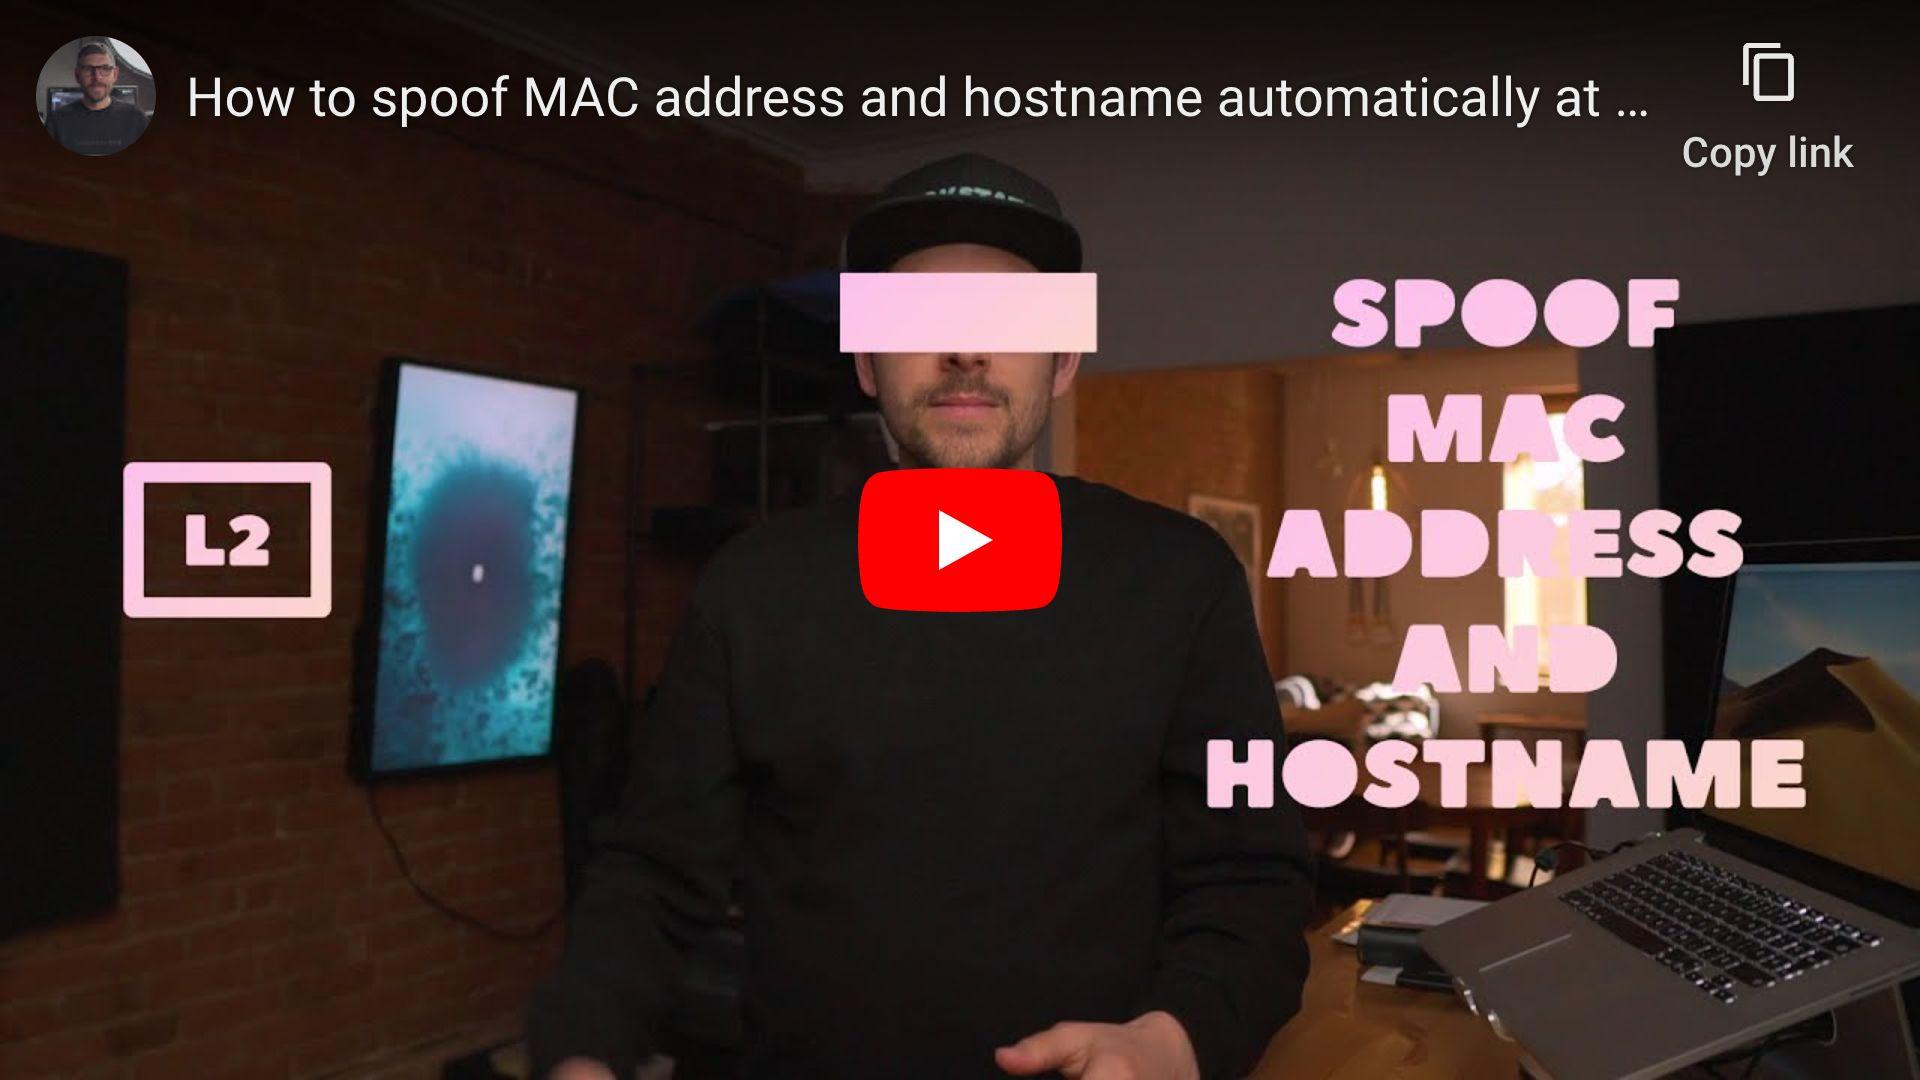 How to spoof MAC address and hostname automatically at boot on macOS